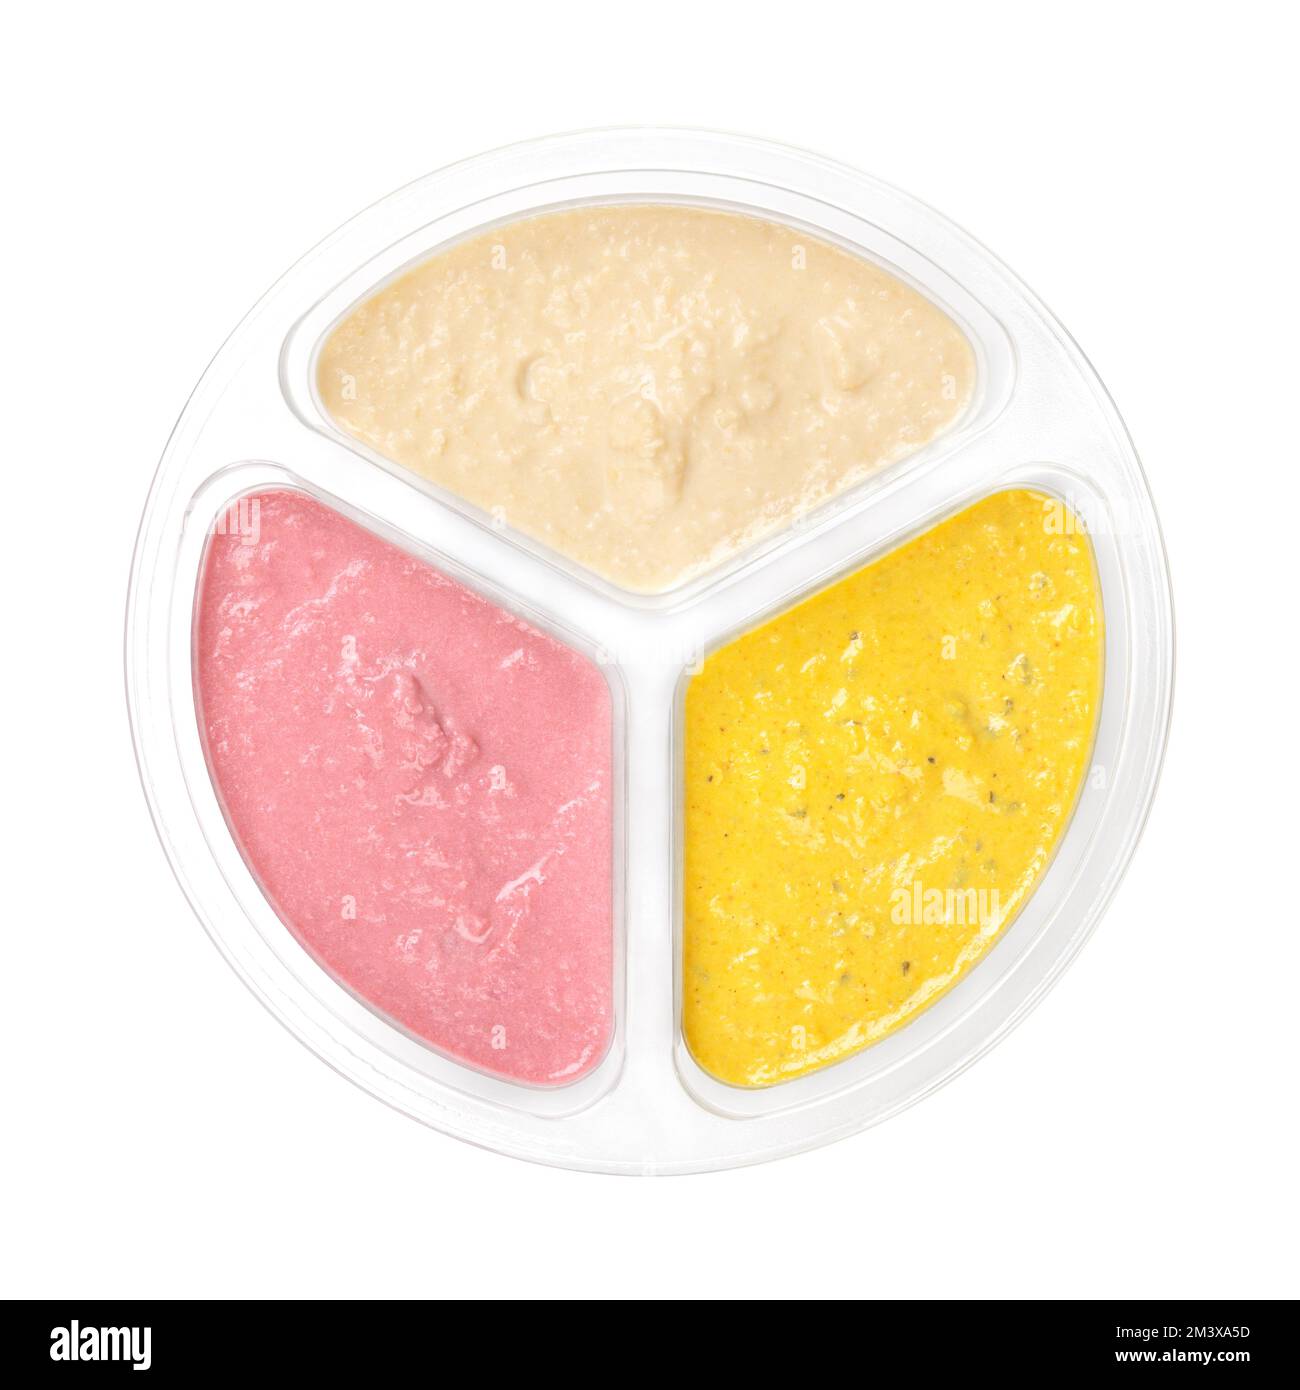 Hummus dip varieties in a clear plastic container. Natural hummus with cumin, yellow curry and red beetroot. Middle Eastern dip and spread. Stock Photo